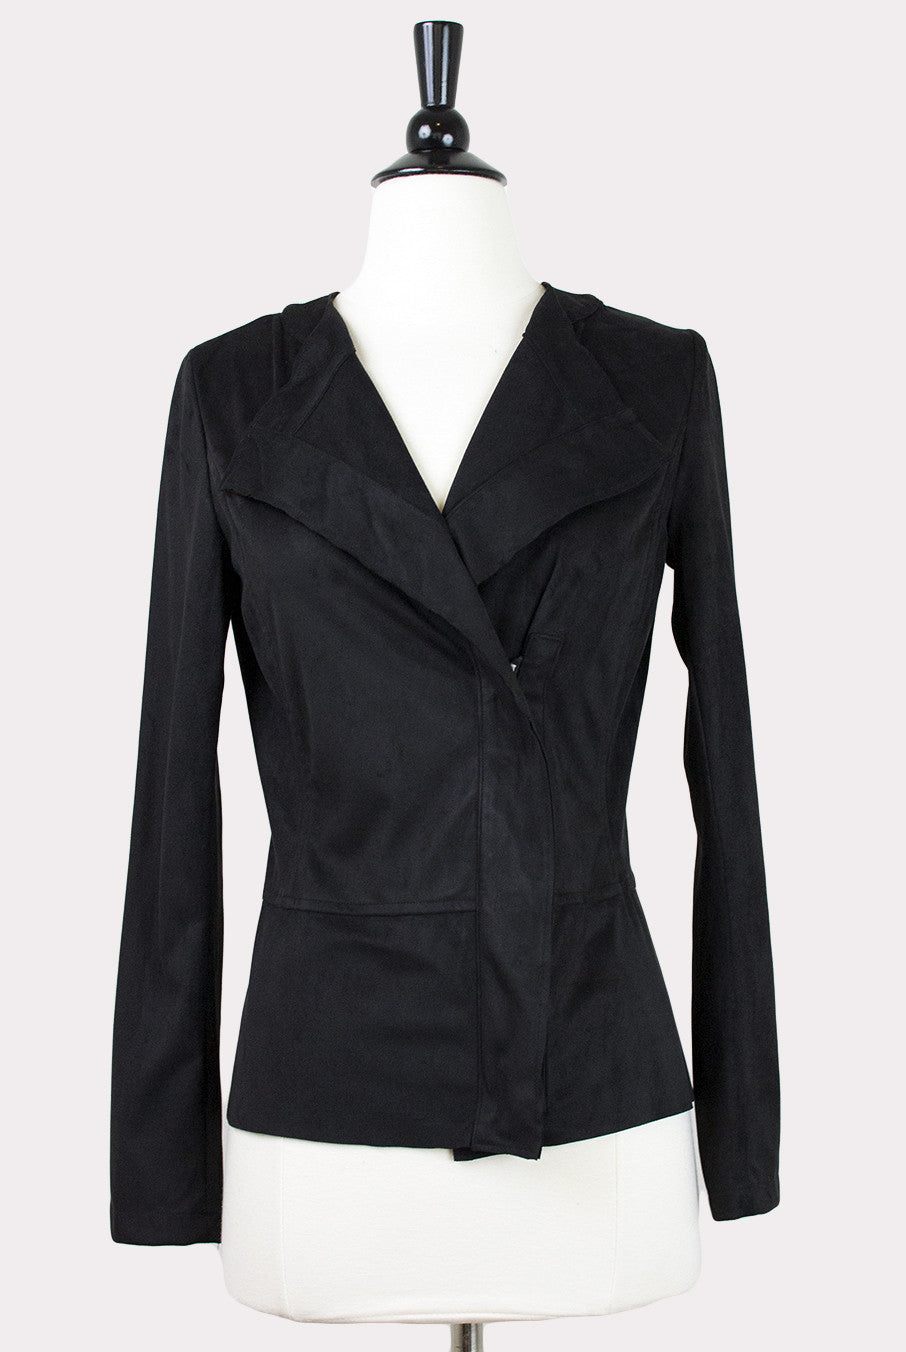 Draped Suede Jacket by Lavand - Hourglass Boutique